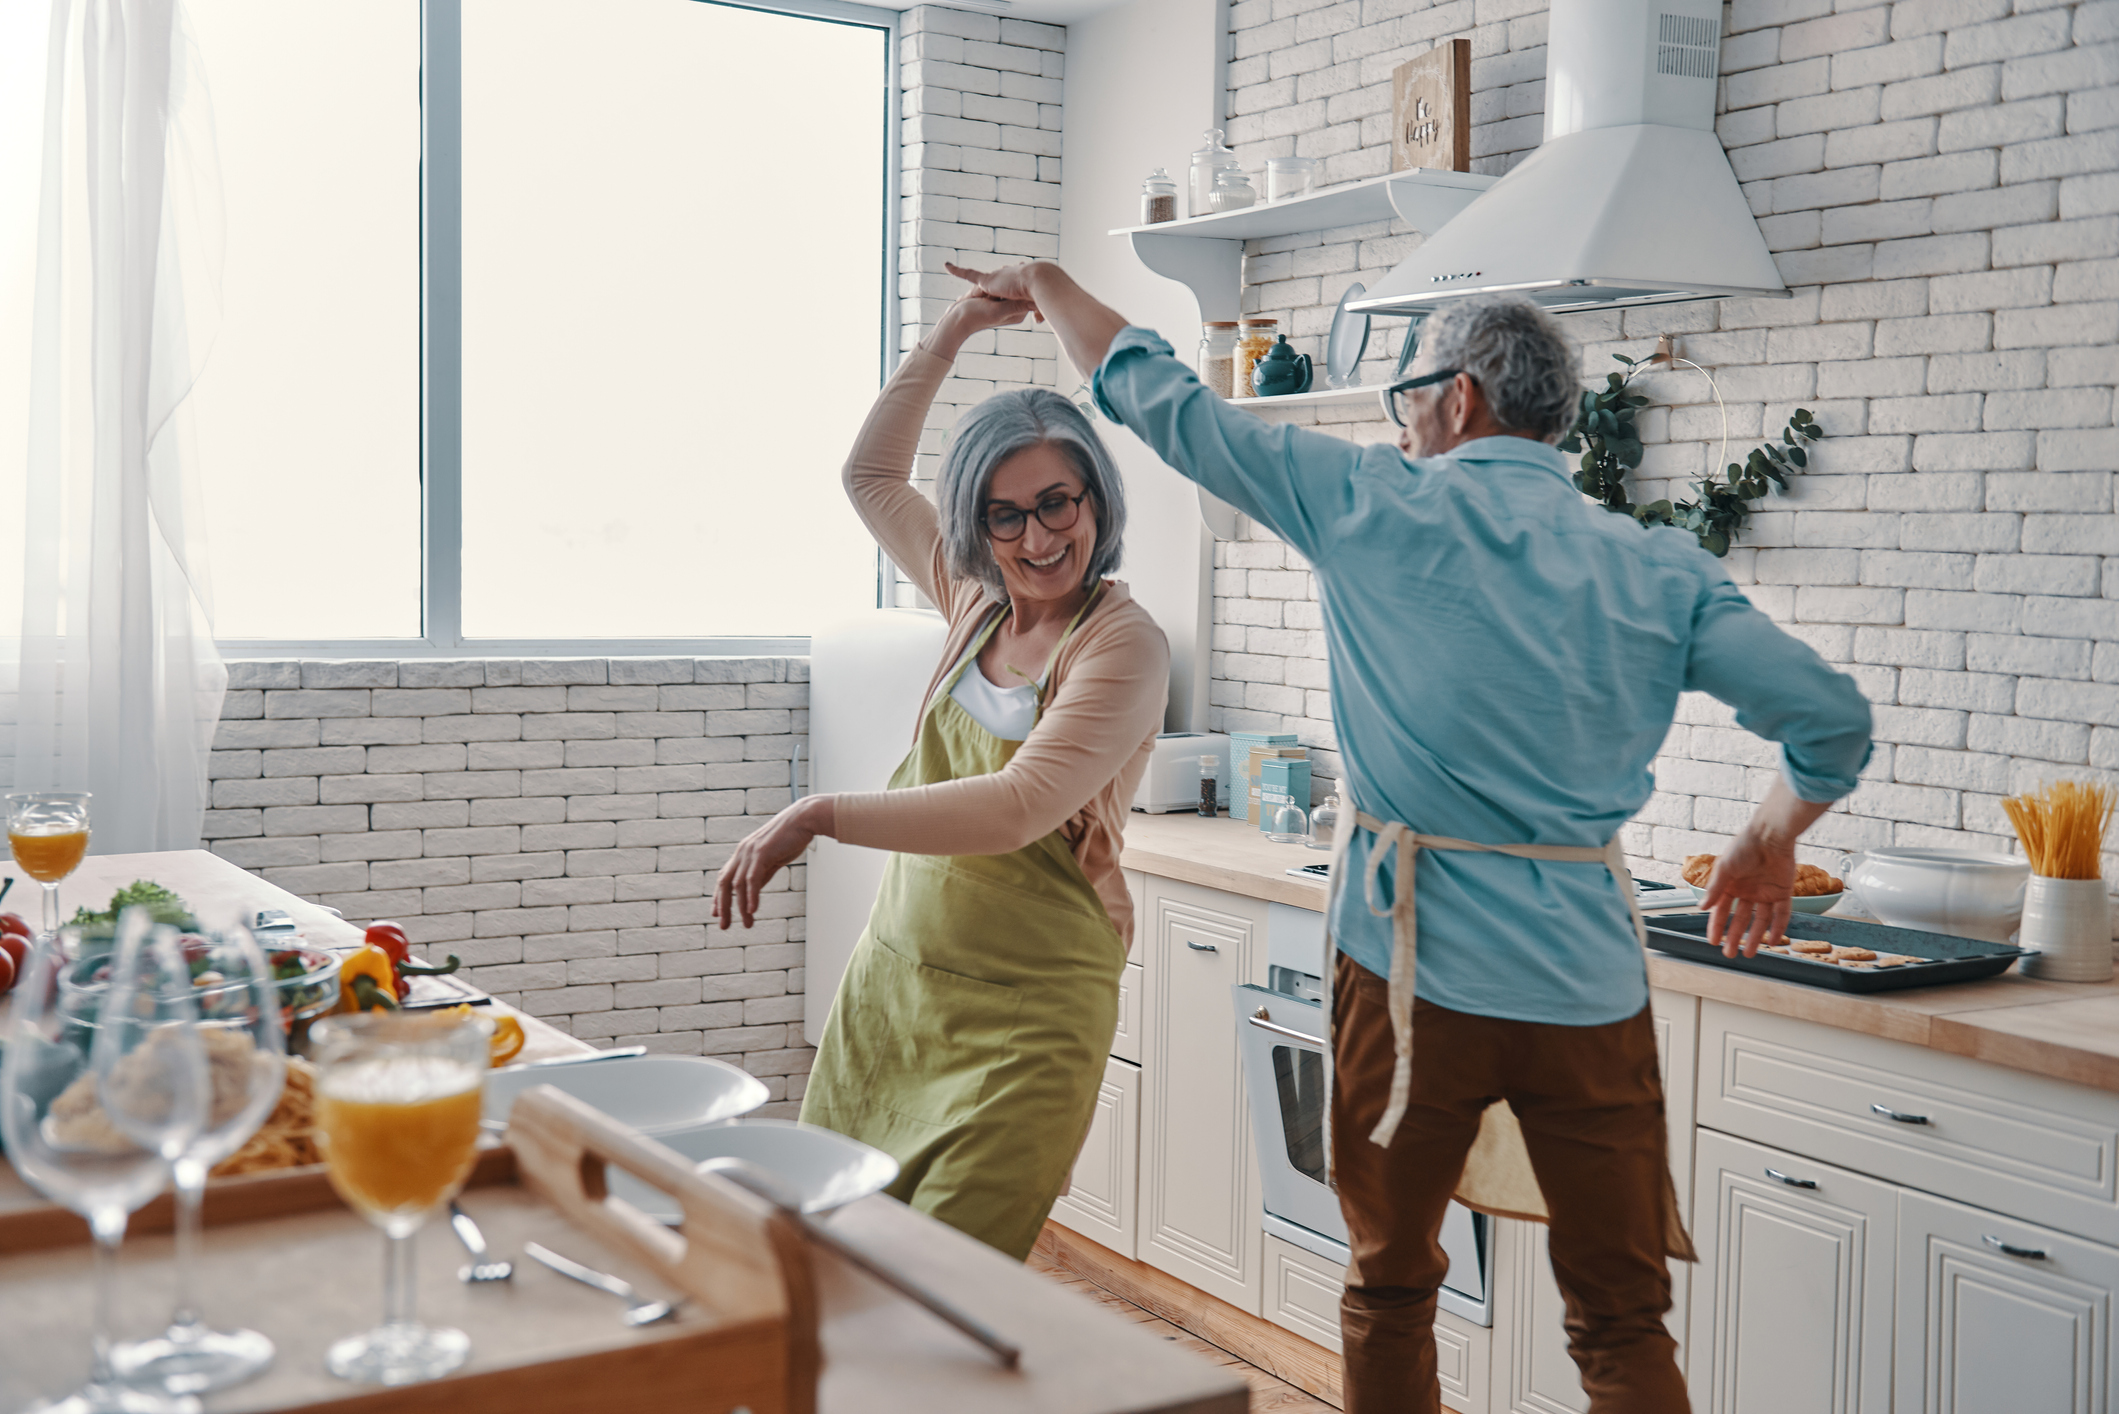 Image of an older couple dancing in the kitchen